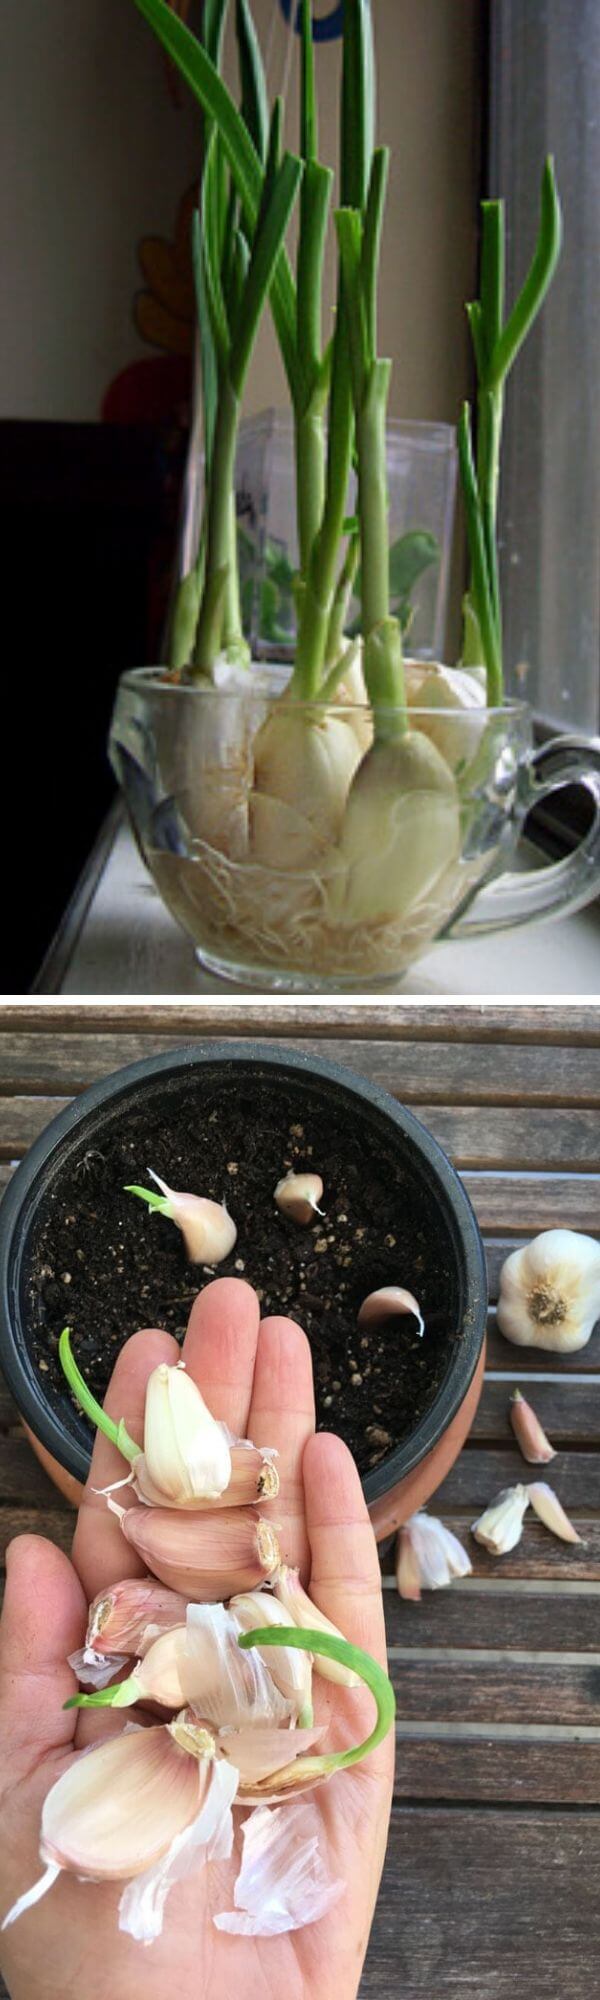 How to grow garlic from kitchen scraps